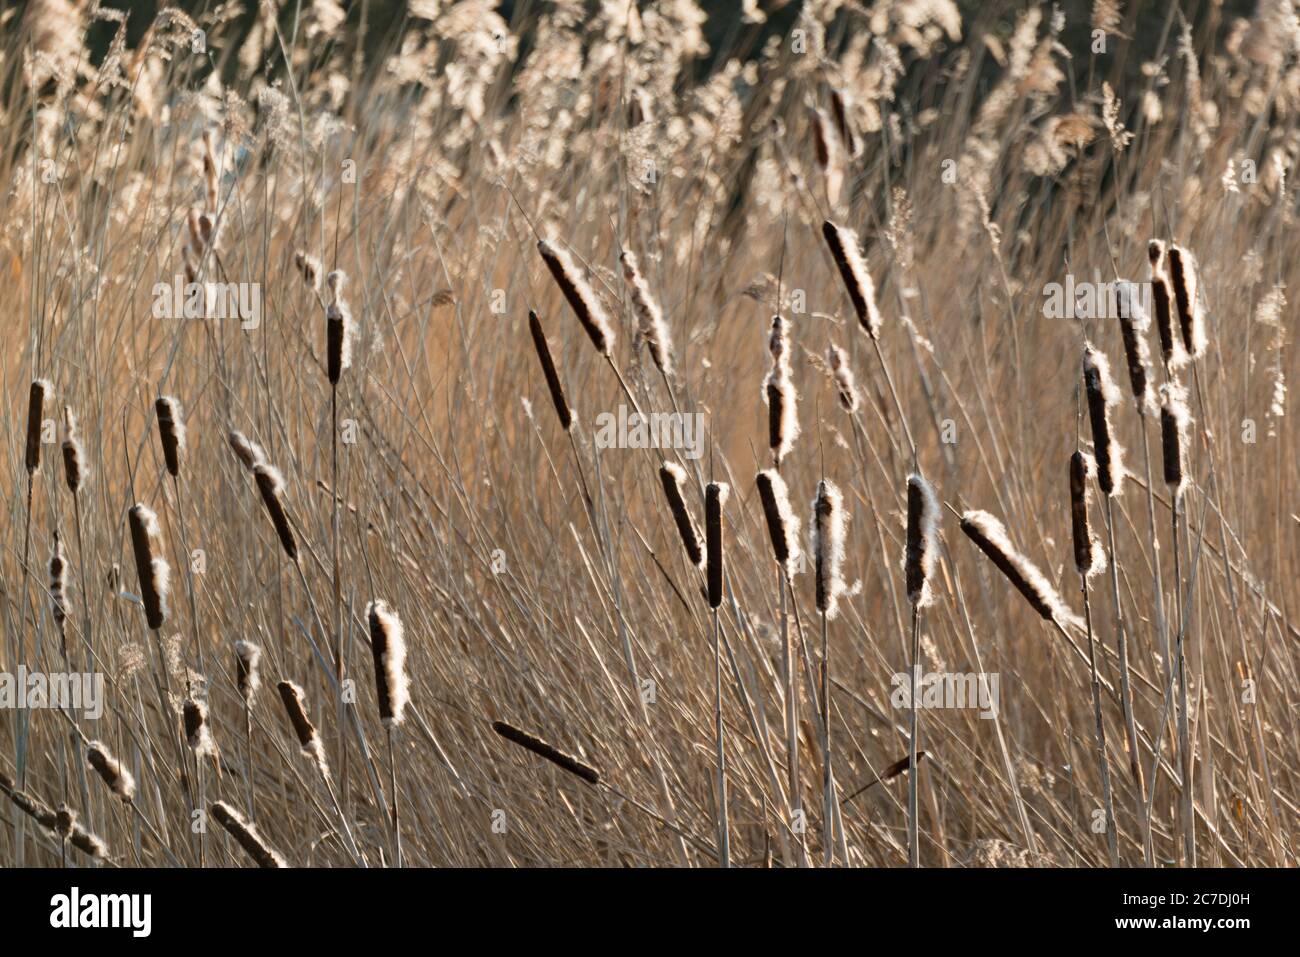 Reeds, sedge and bulrushes in Lee Valley Country Park on the Essex/Hertfordshire border in England, UK Stock Photo